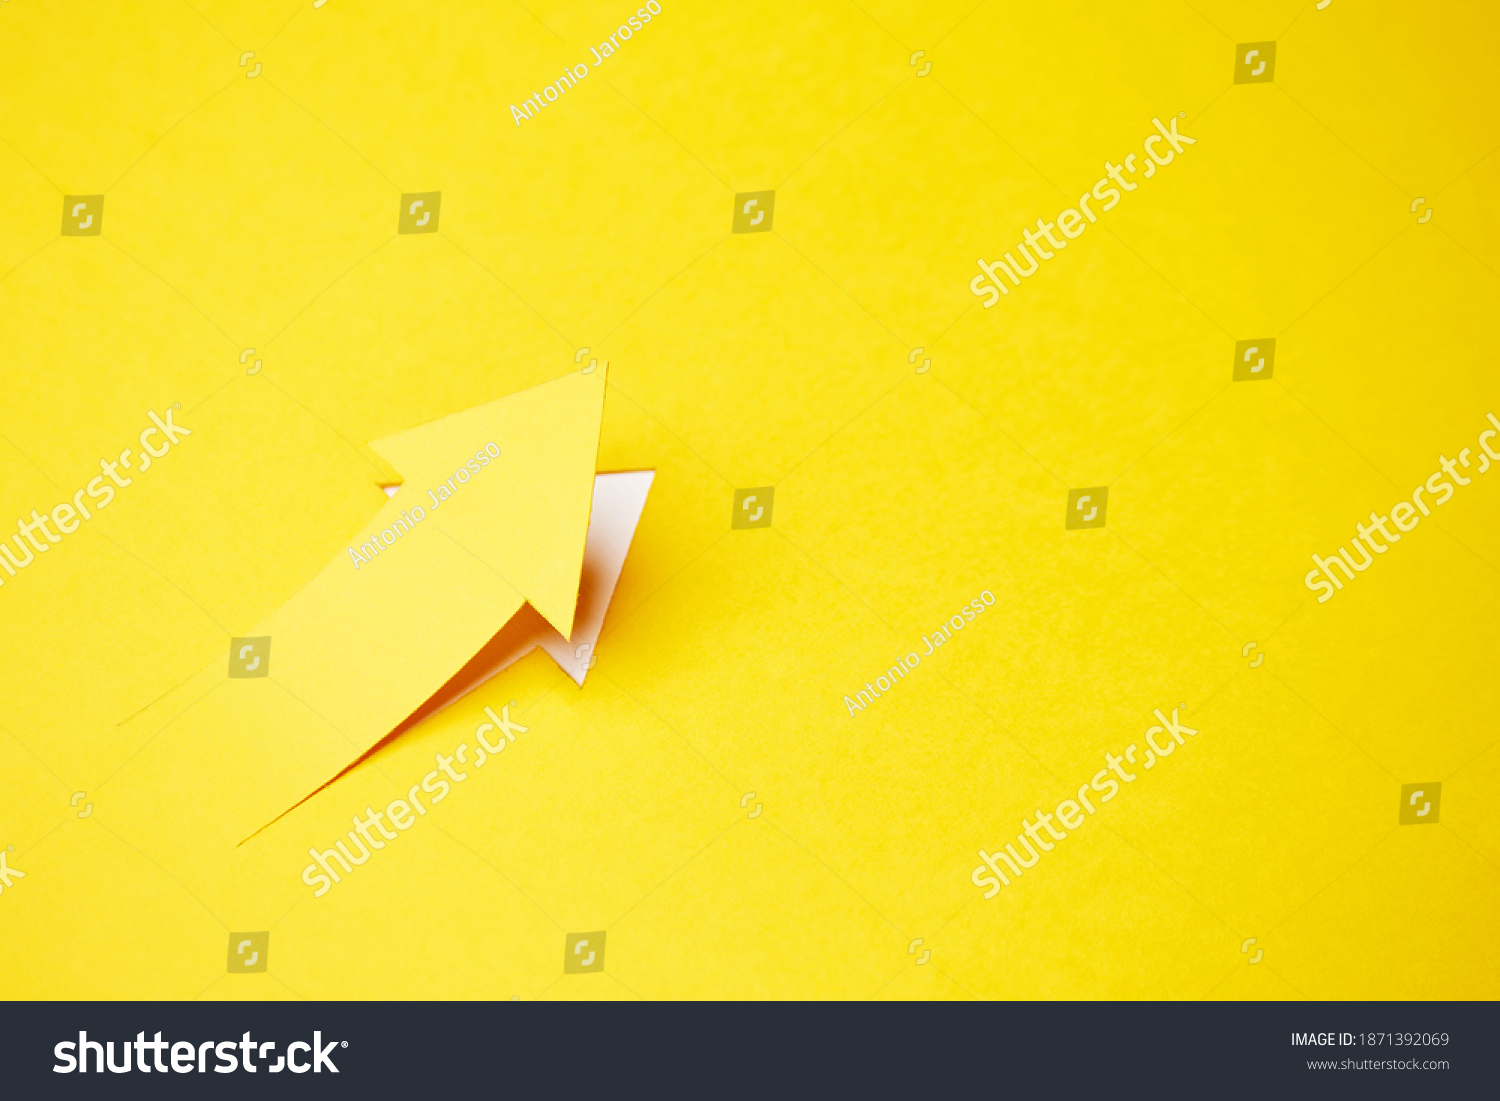 Right-up arrow cutted from solid sheet of yellow paper and curved up of one side with white paper underlay showing growth of stock market or up direction #1871392069